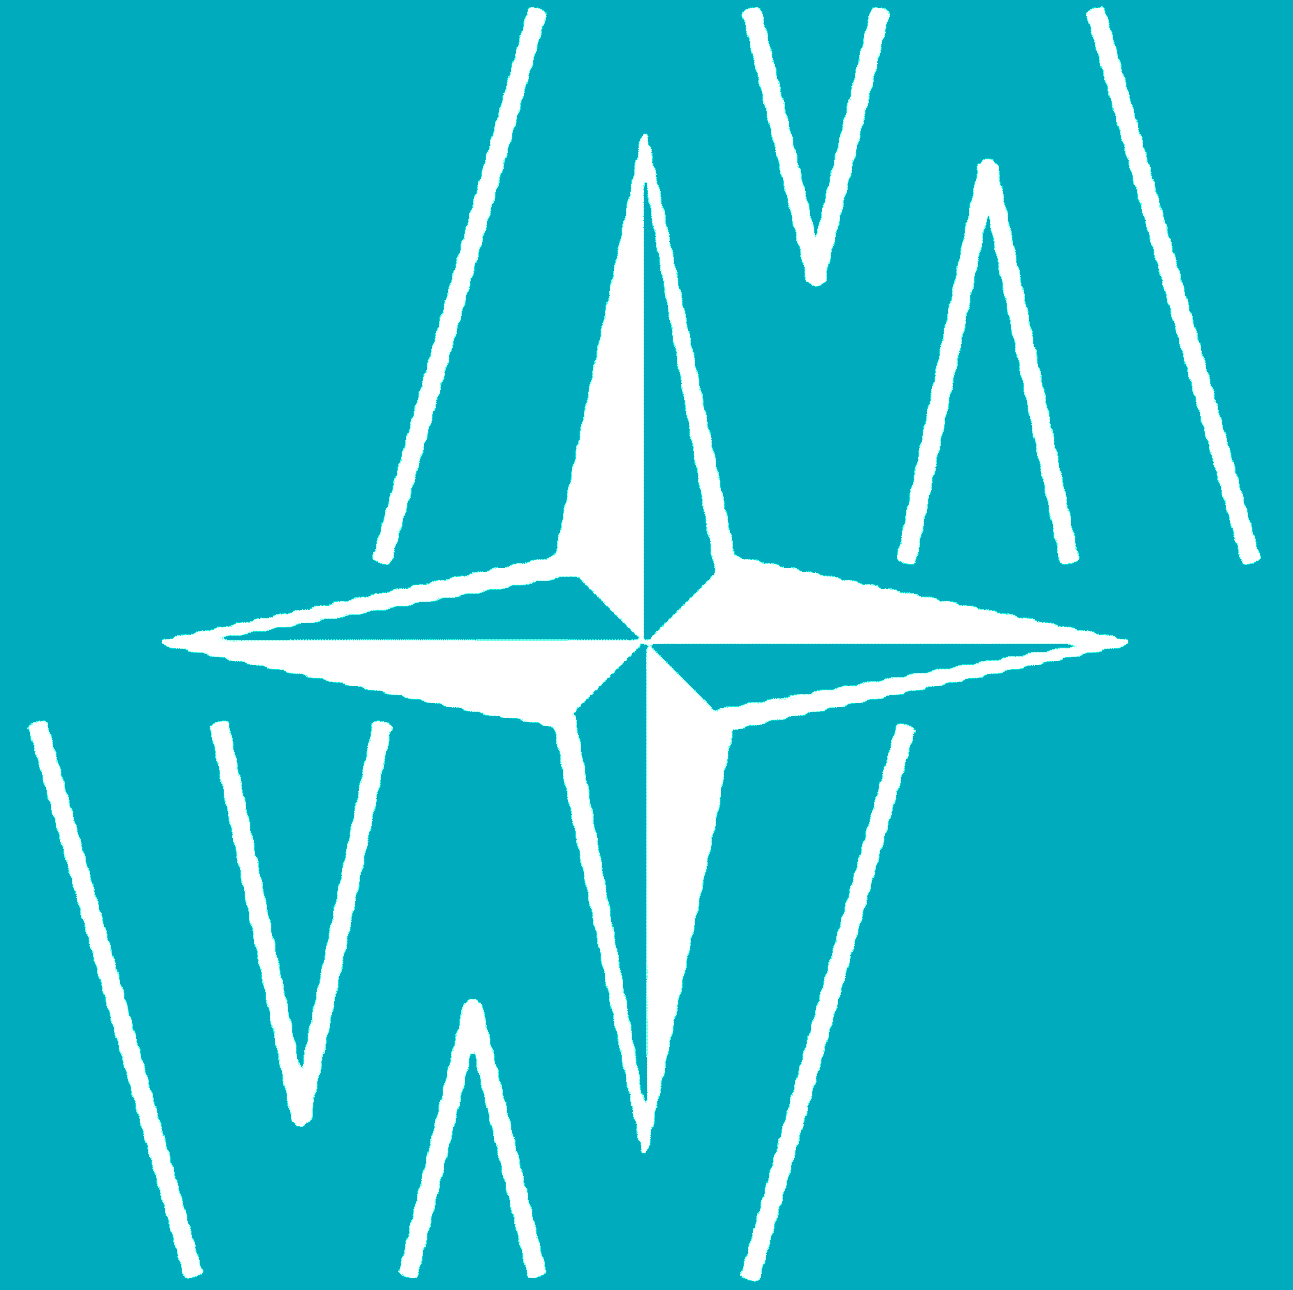 Teal Logos Http   Commons Wikimedia Org Wiki File Mwf Logo Teal Png